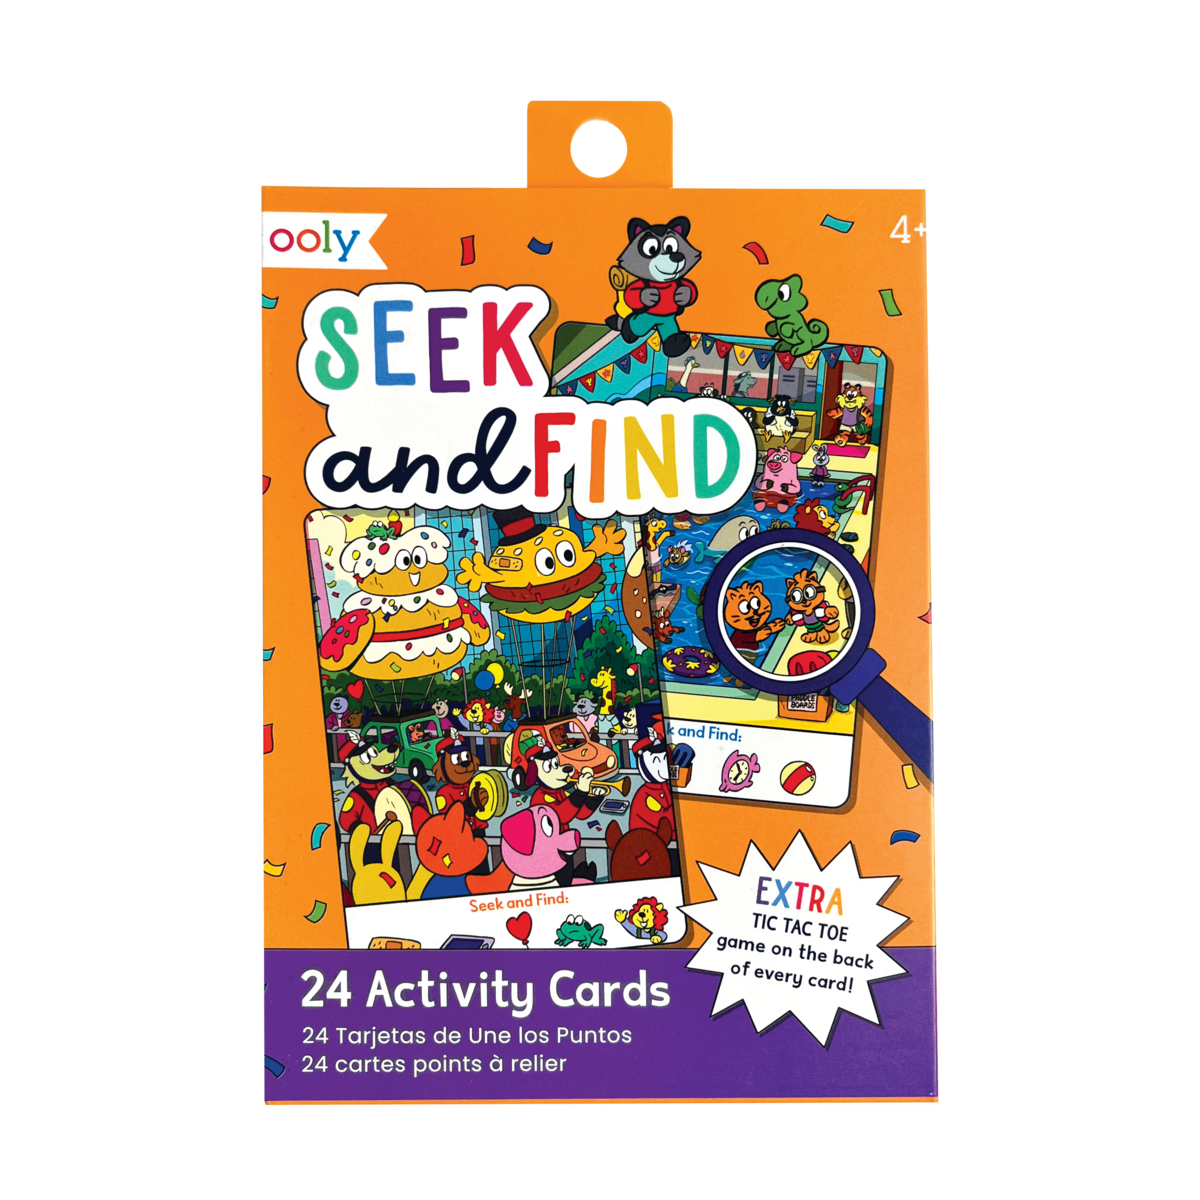 Ooly | 24 Activity Cards - Seek and Find